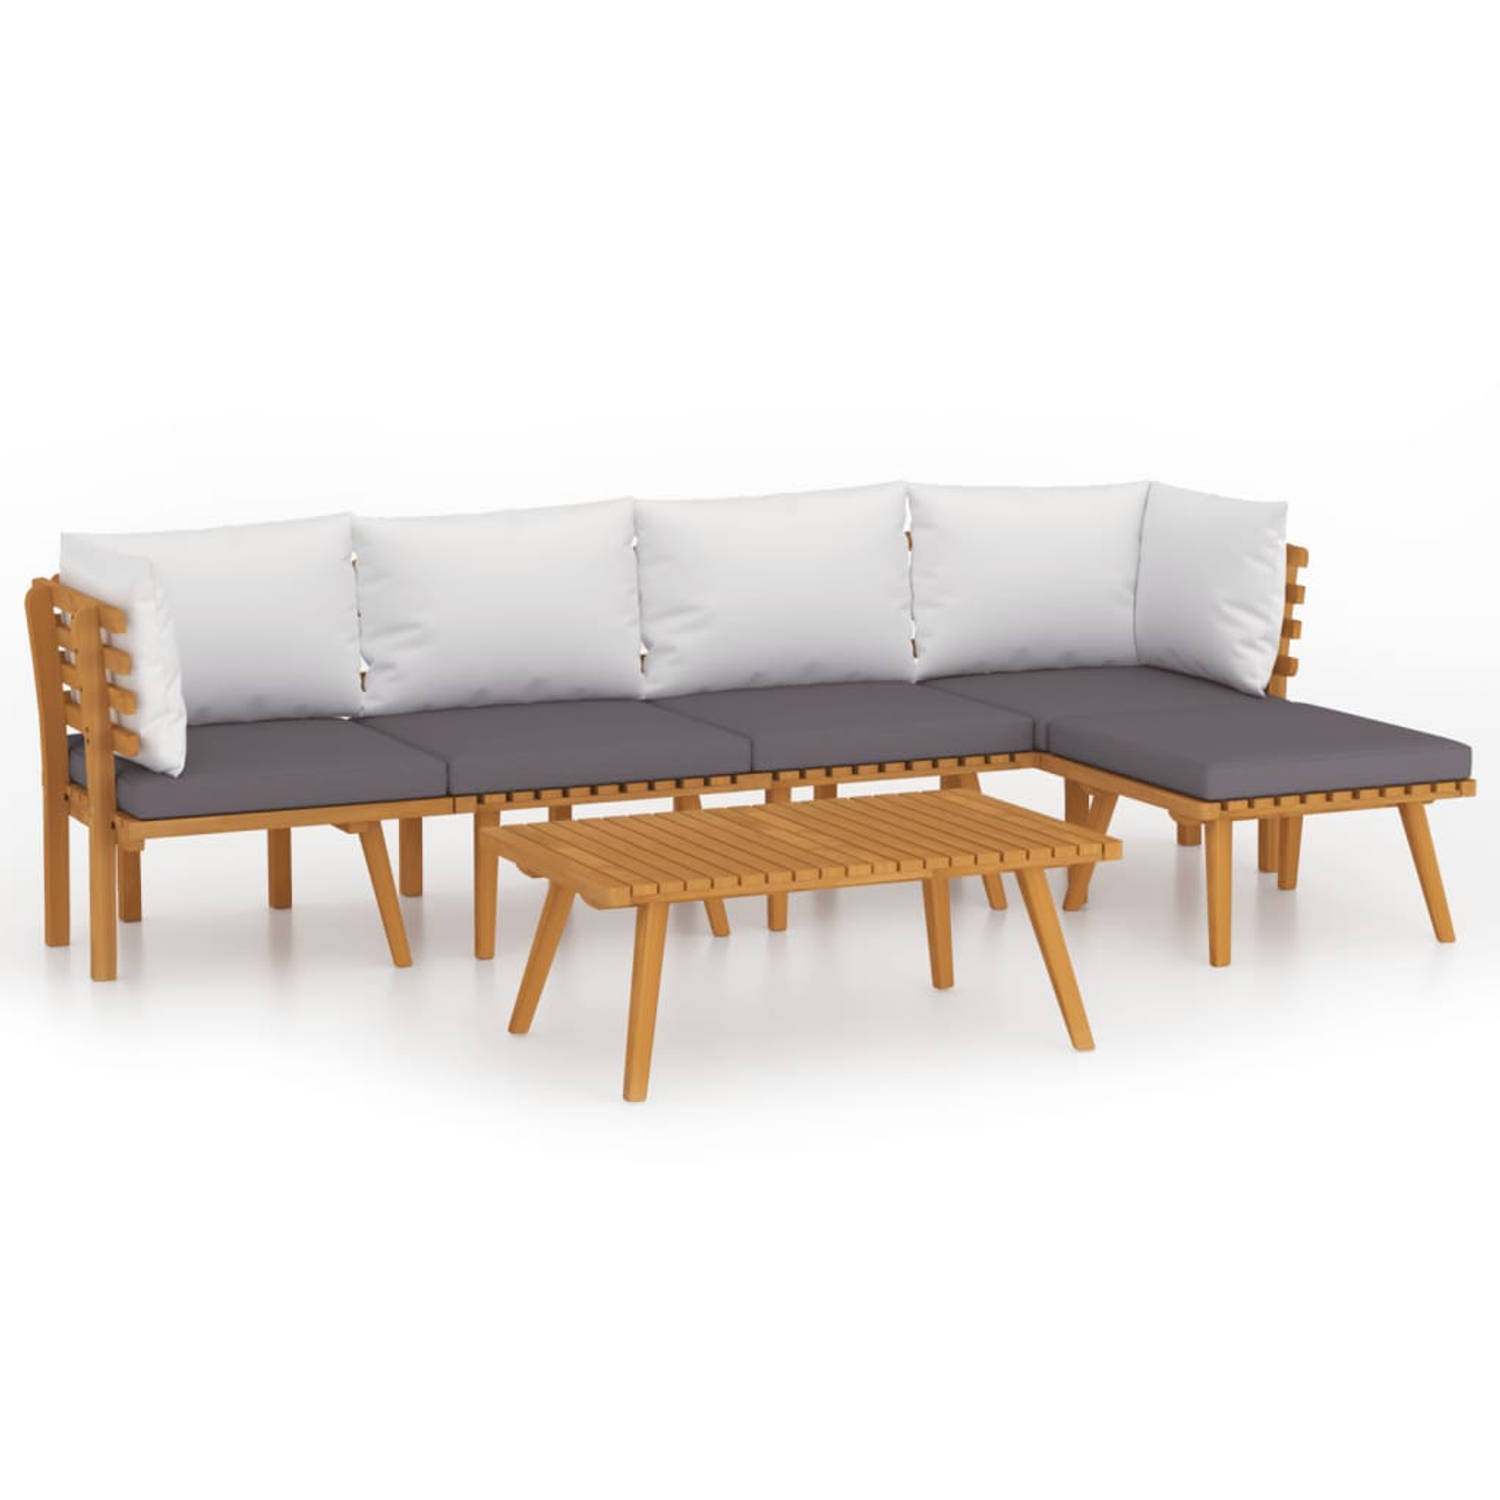 The Living Store Houten Tuinset - Lounge - 6-delig - 90x55x35 cm - Acaciahout en polyester stof